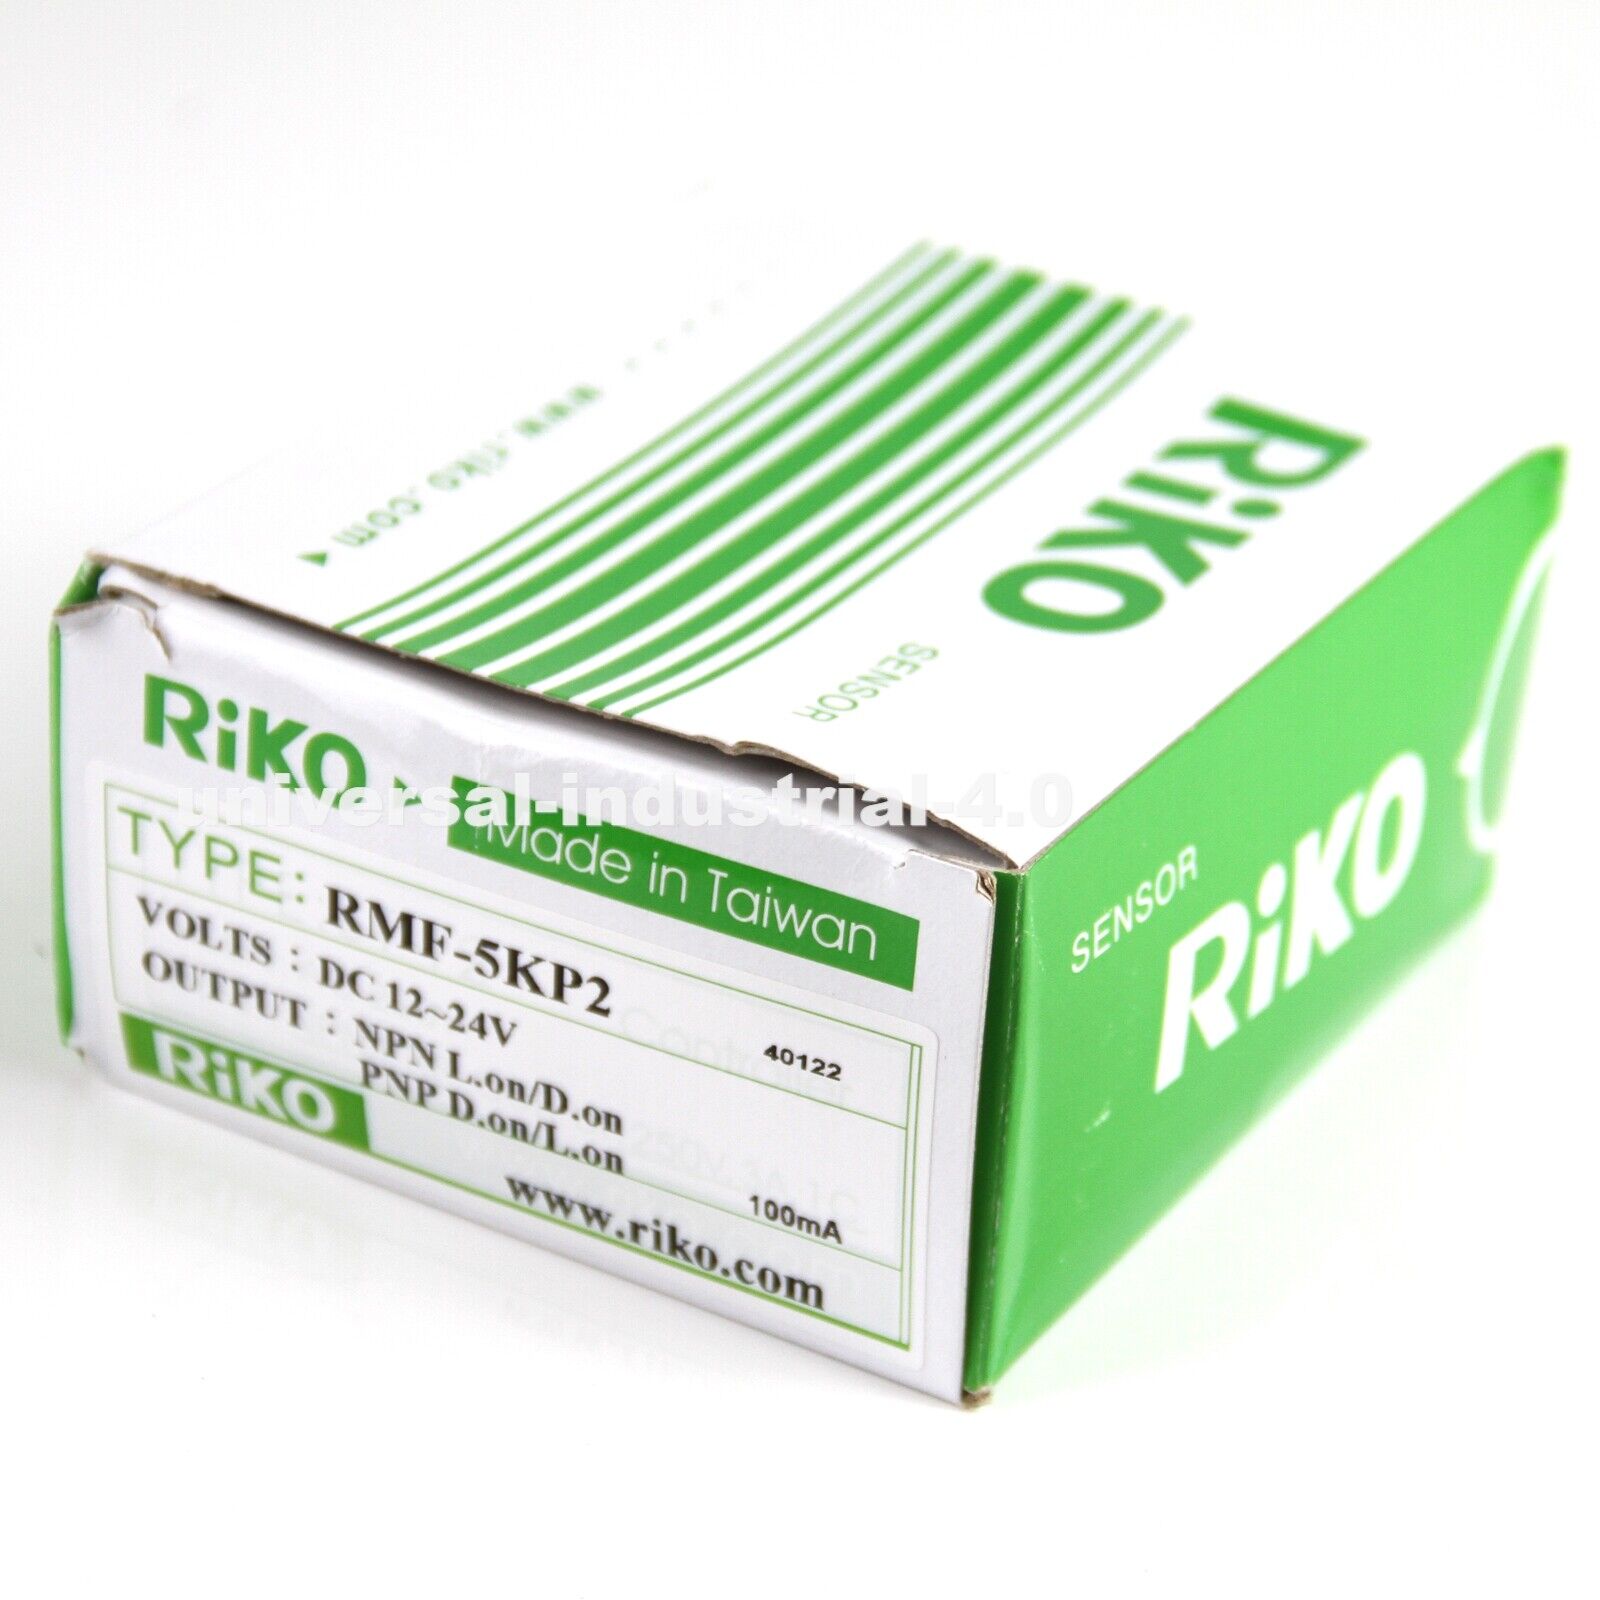 RIKO RMF-5KP2 Photoelectric Switch